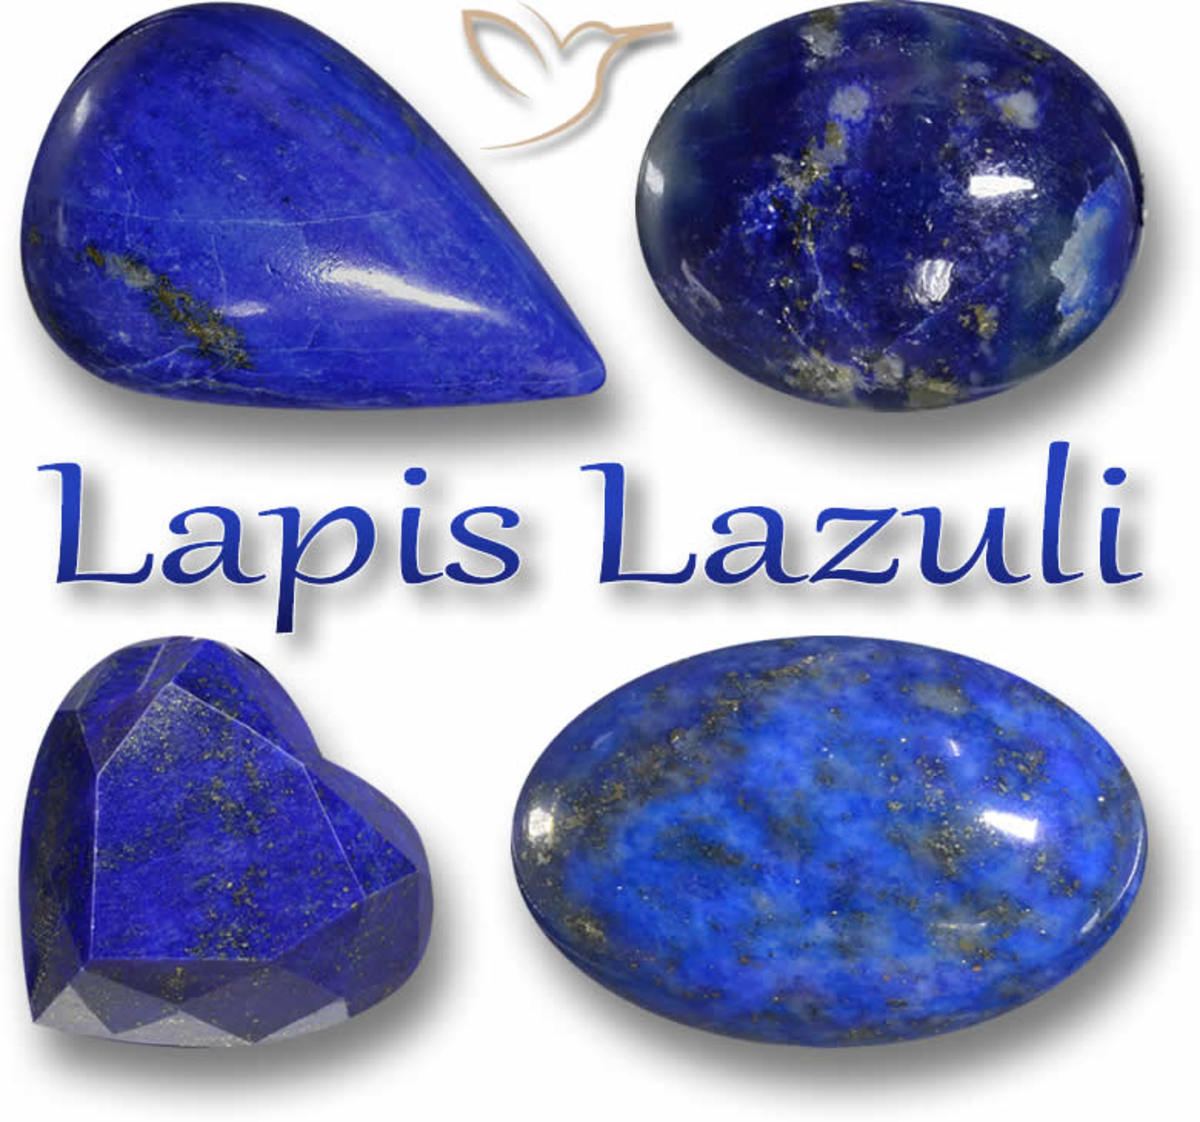 lapis-laluzi-the-power-stone-of-the-bible